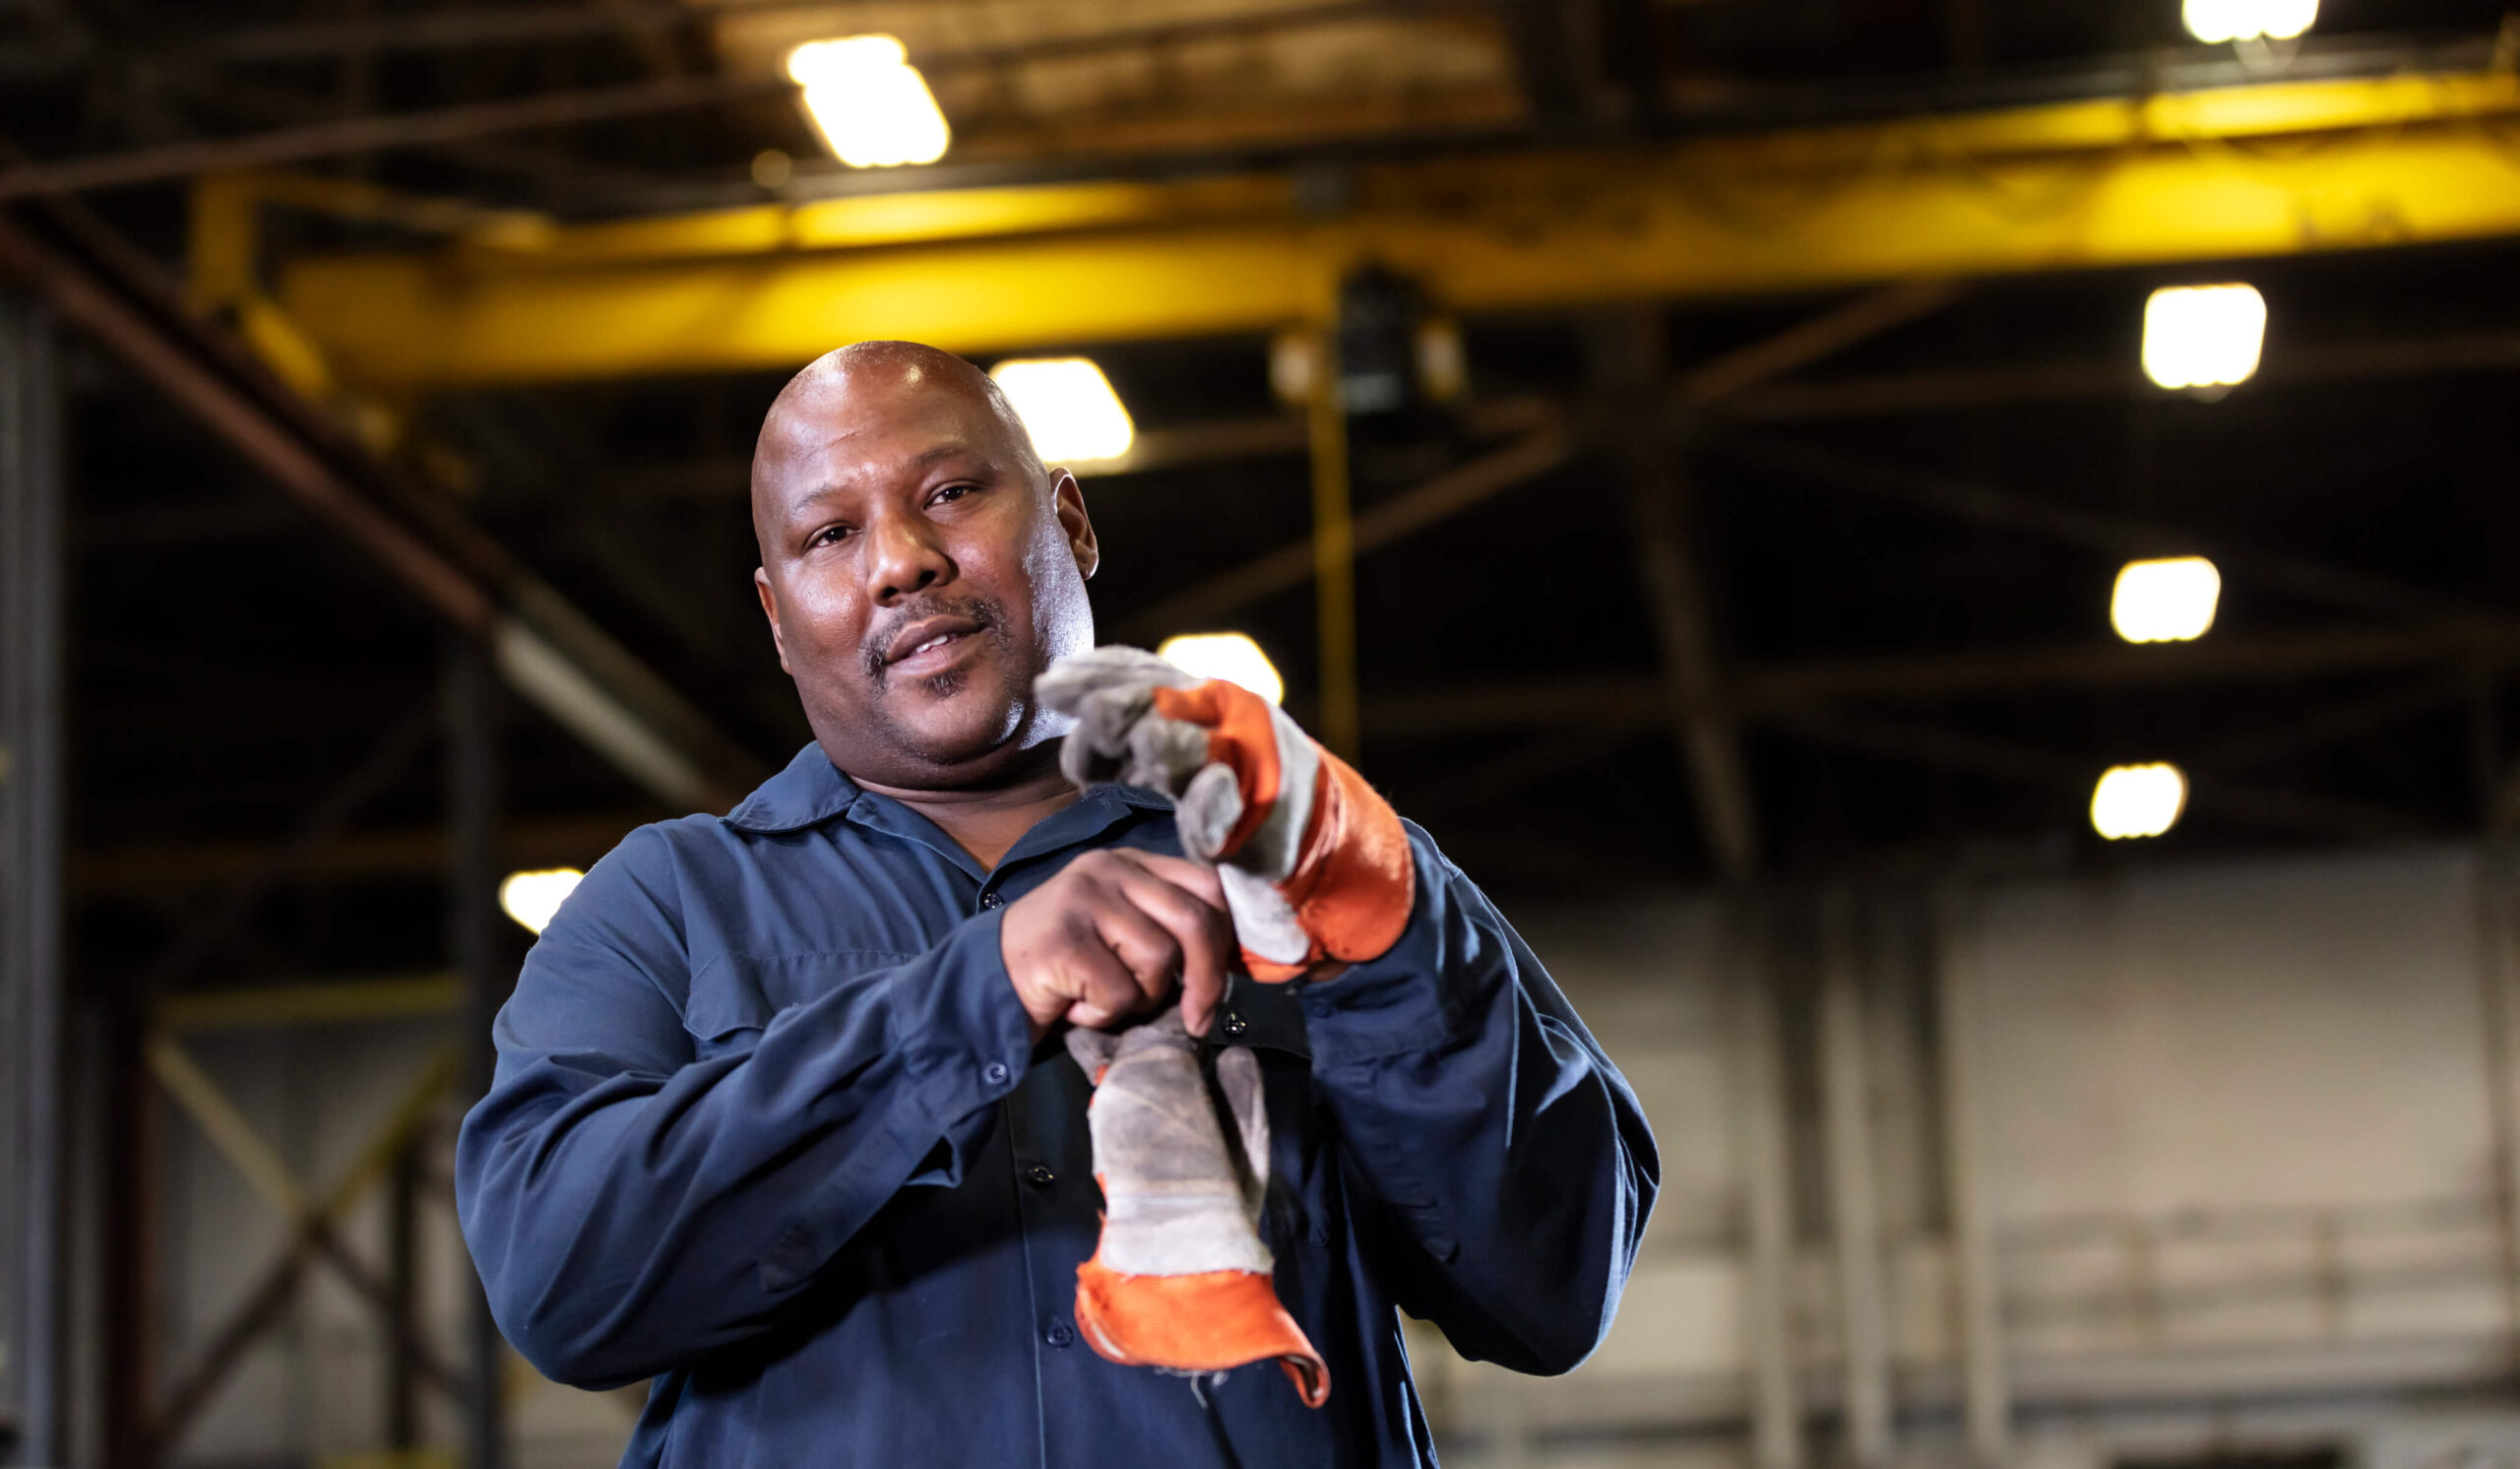 Under warehouse lights, a man puts on his work gloves. Certain limited options allow you to keep working while qualifying for Social Security Disability benefits.